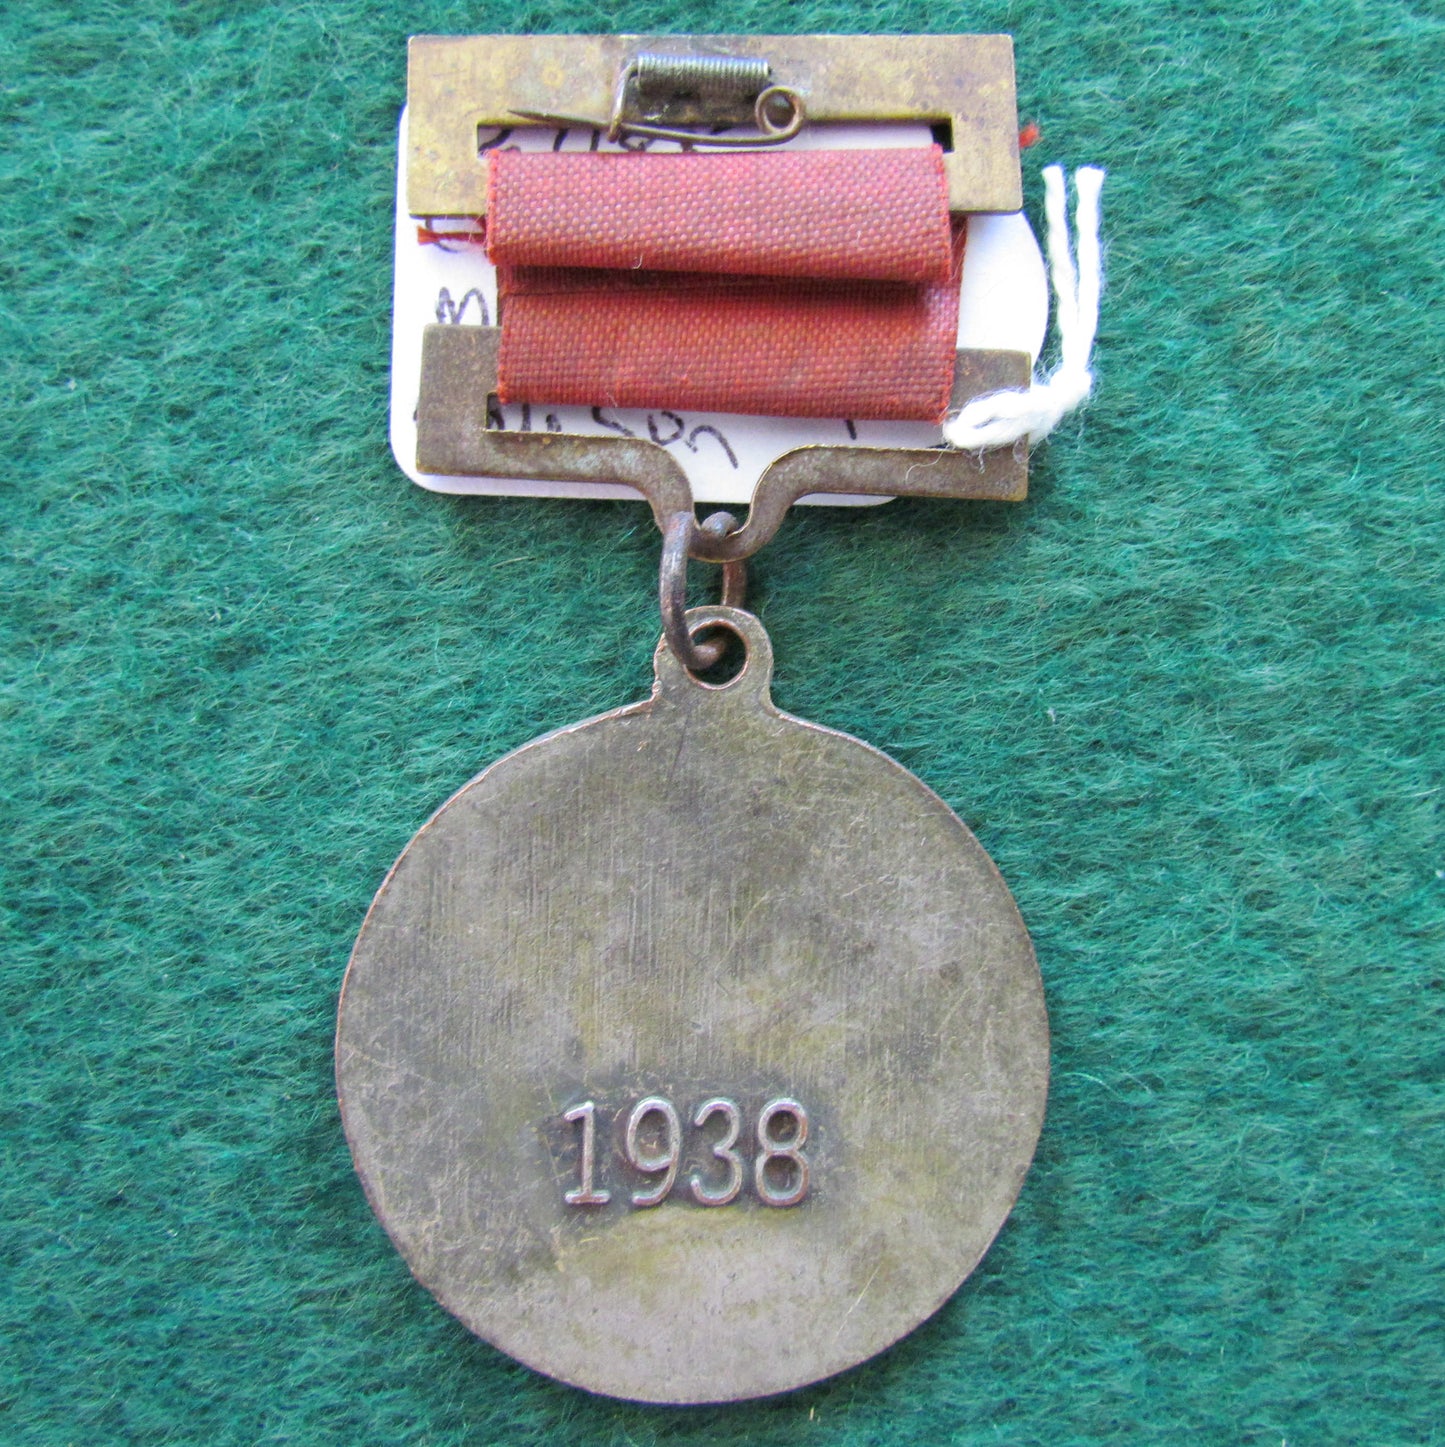 China Chinese Army 4th Platoon Commemorative Medal From 1938